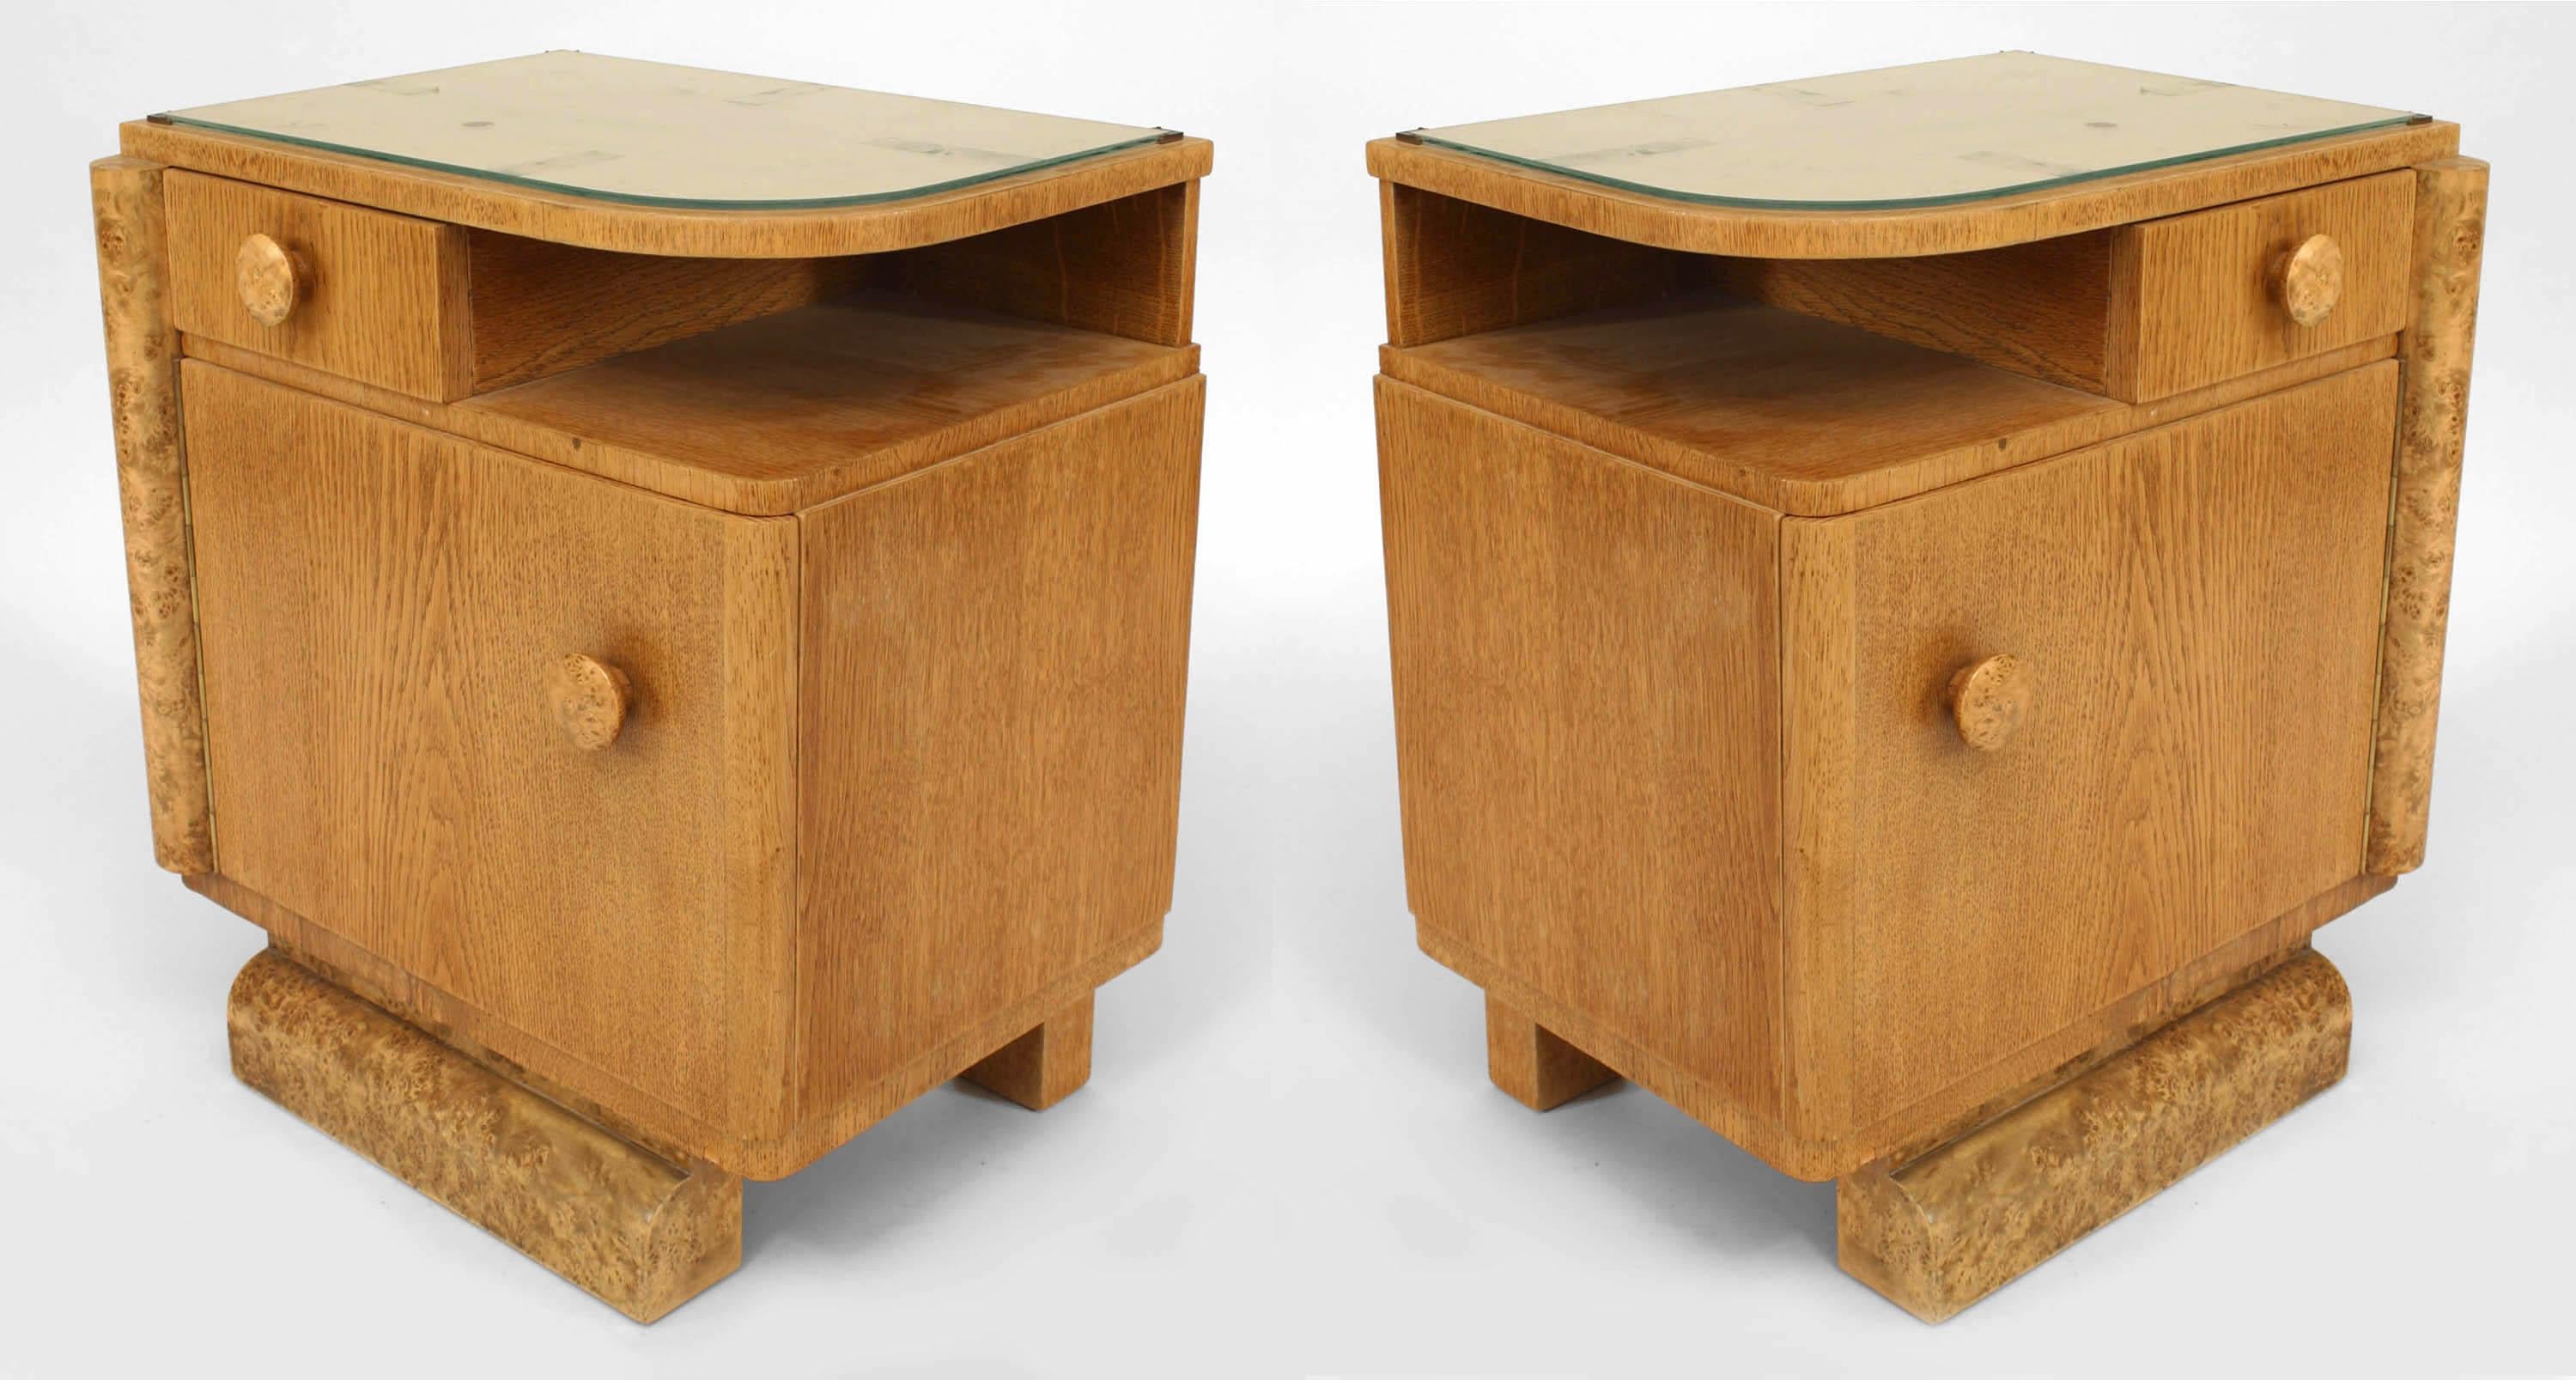 Pair of French Art Deco oak bedside commodes with burl wood trim, a small shelf, one drawer, and a large door with a glass top. (PRICED AS Pair)
